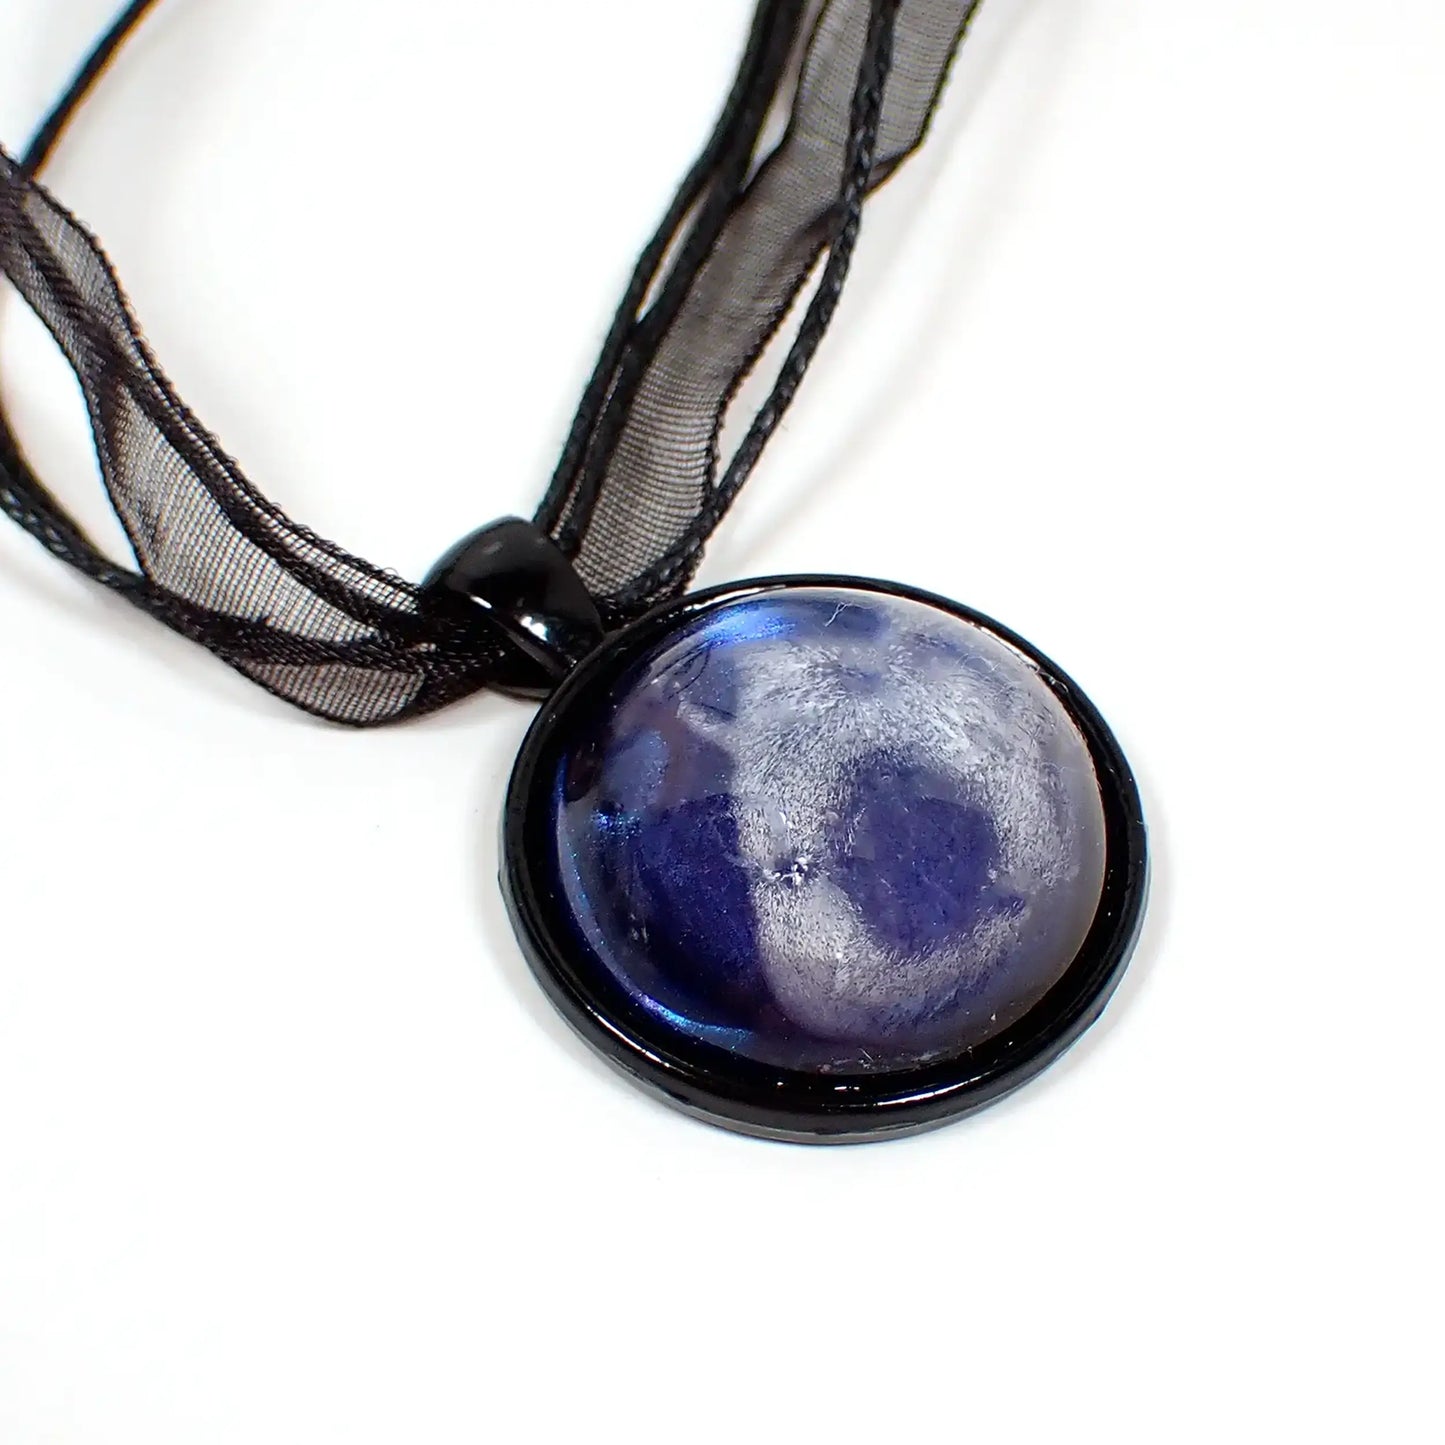 Enlarged view of the handmade black and resin pendant necklace. The necklace has three black strands of faux leather cord and a strand of organza ribbon. The pendant has a black coated base and is round. There is a domed round cab on the front made of resin with an iridescent blue background and a white abstract frost like design going through it.